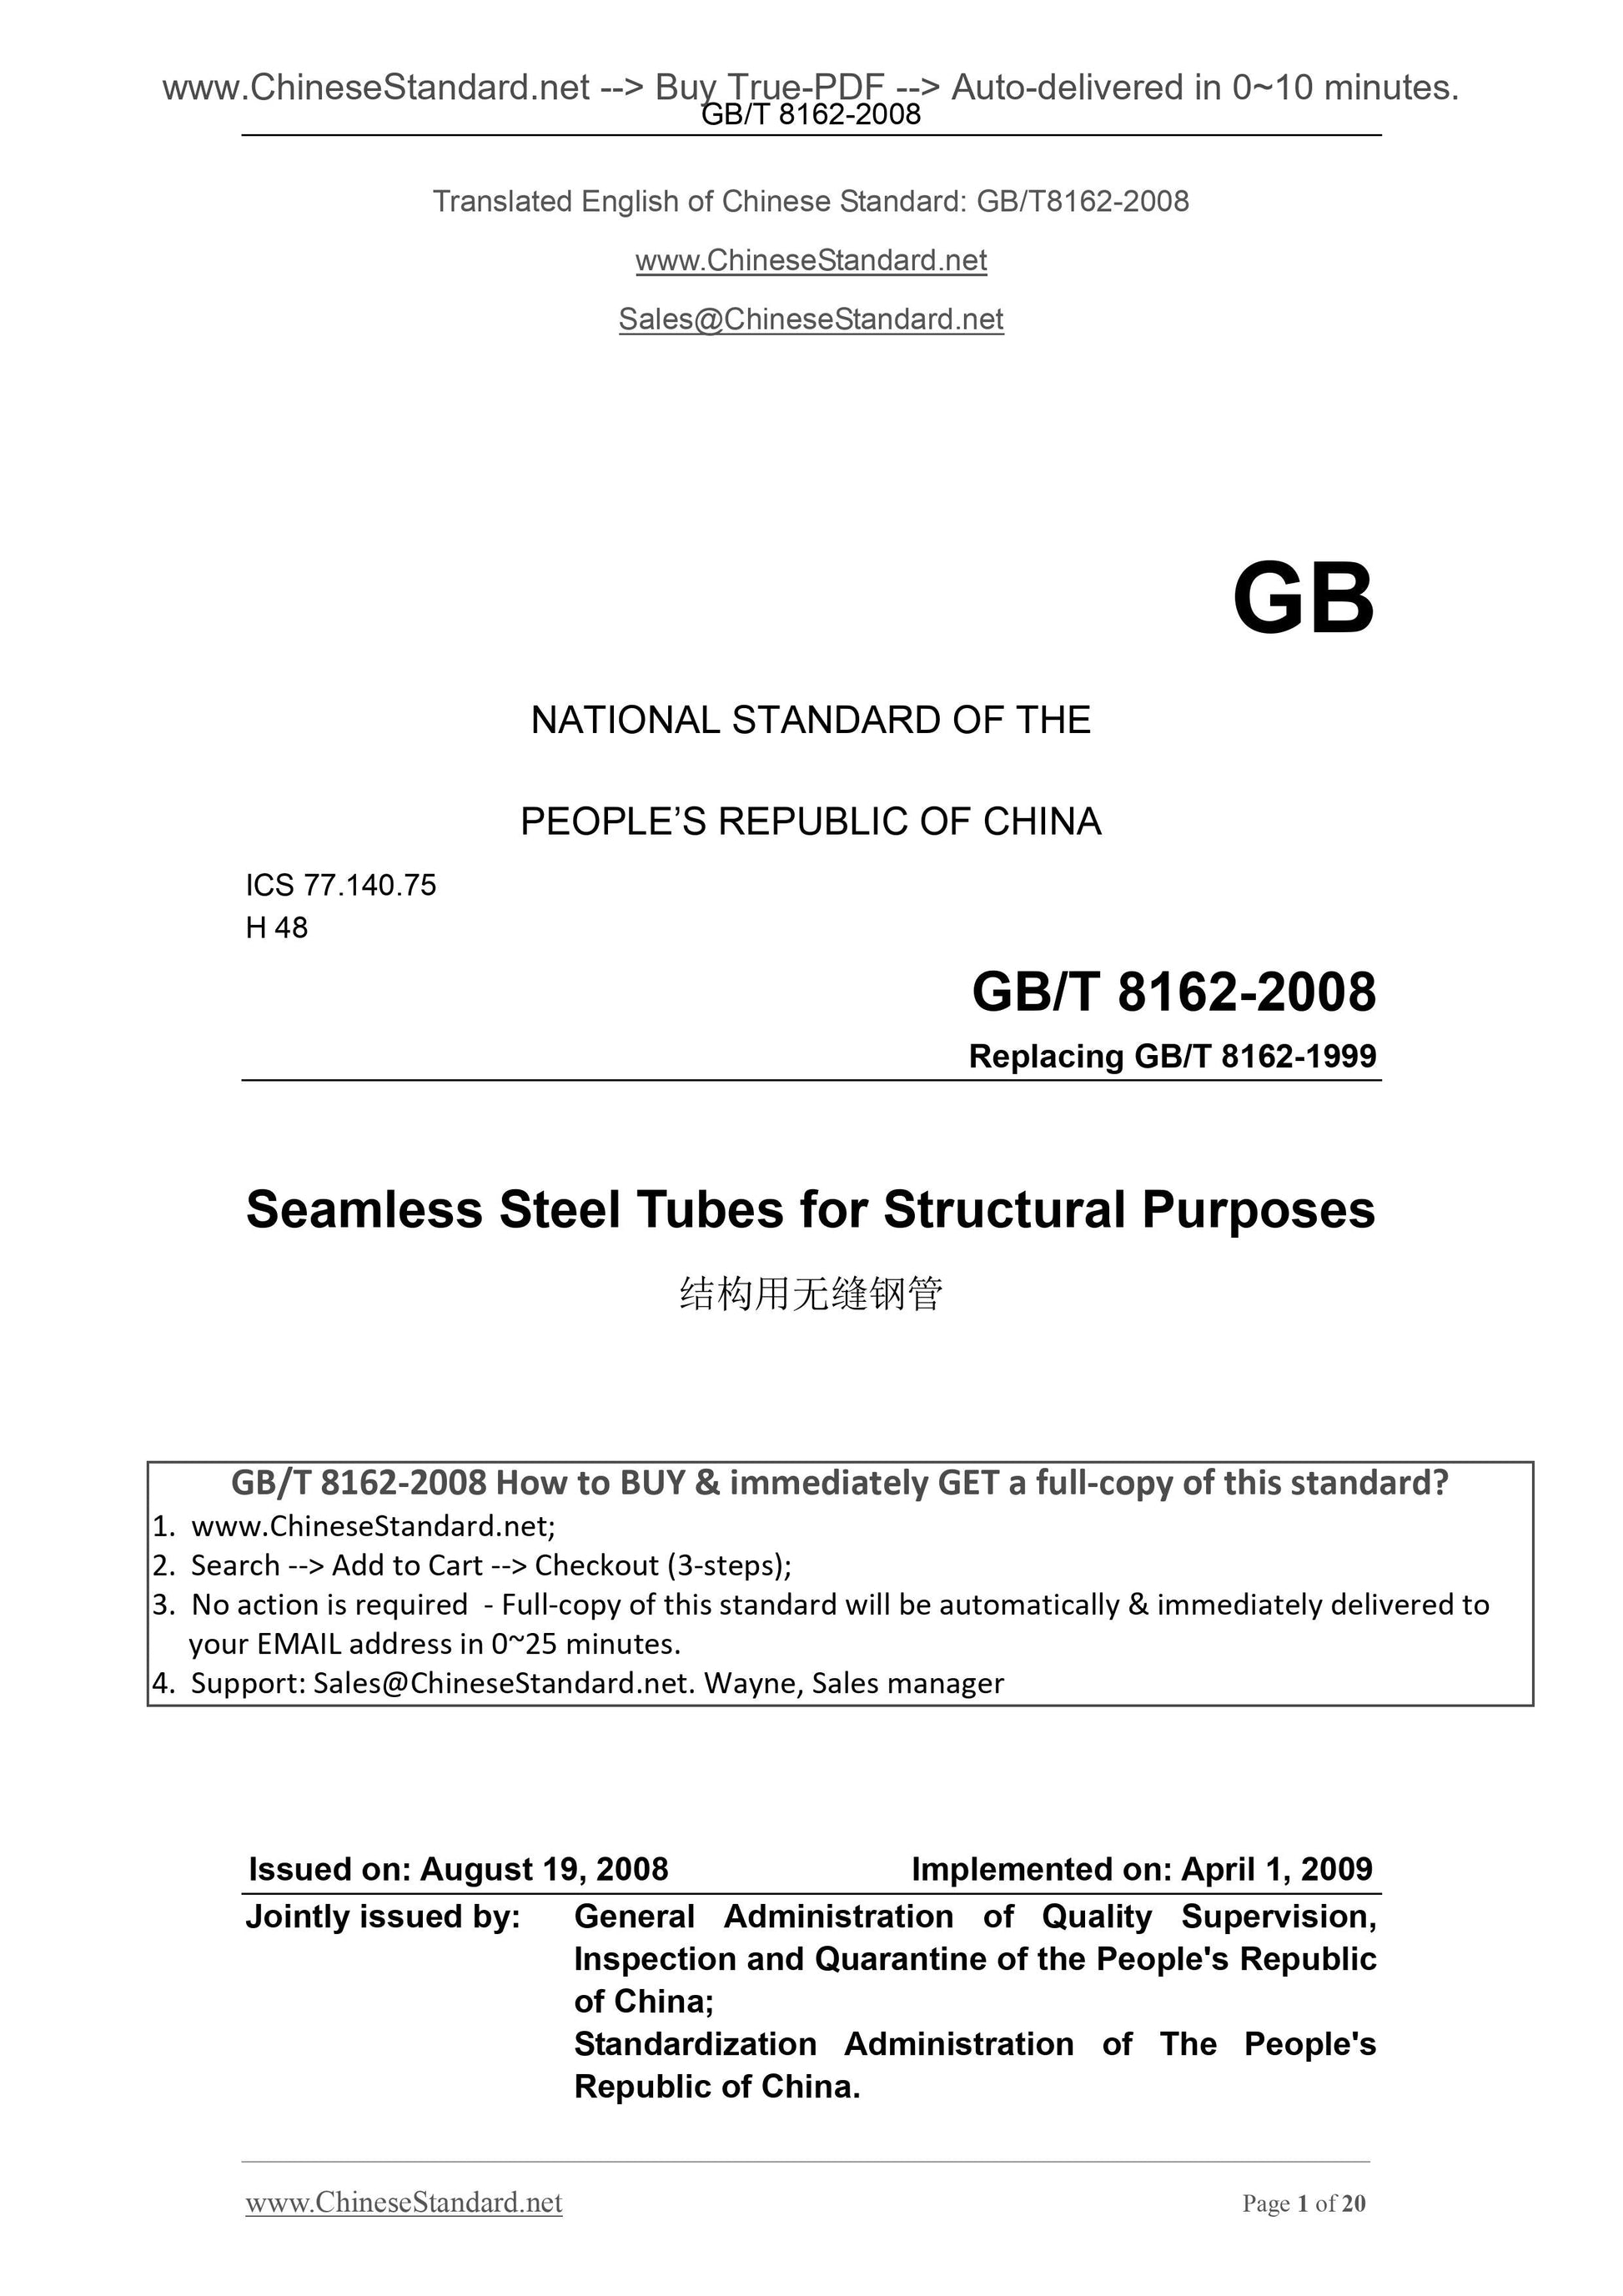 GB/T 8162-2008 Page 1